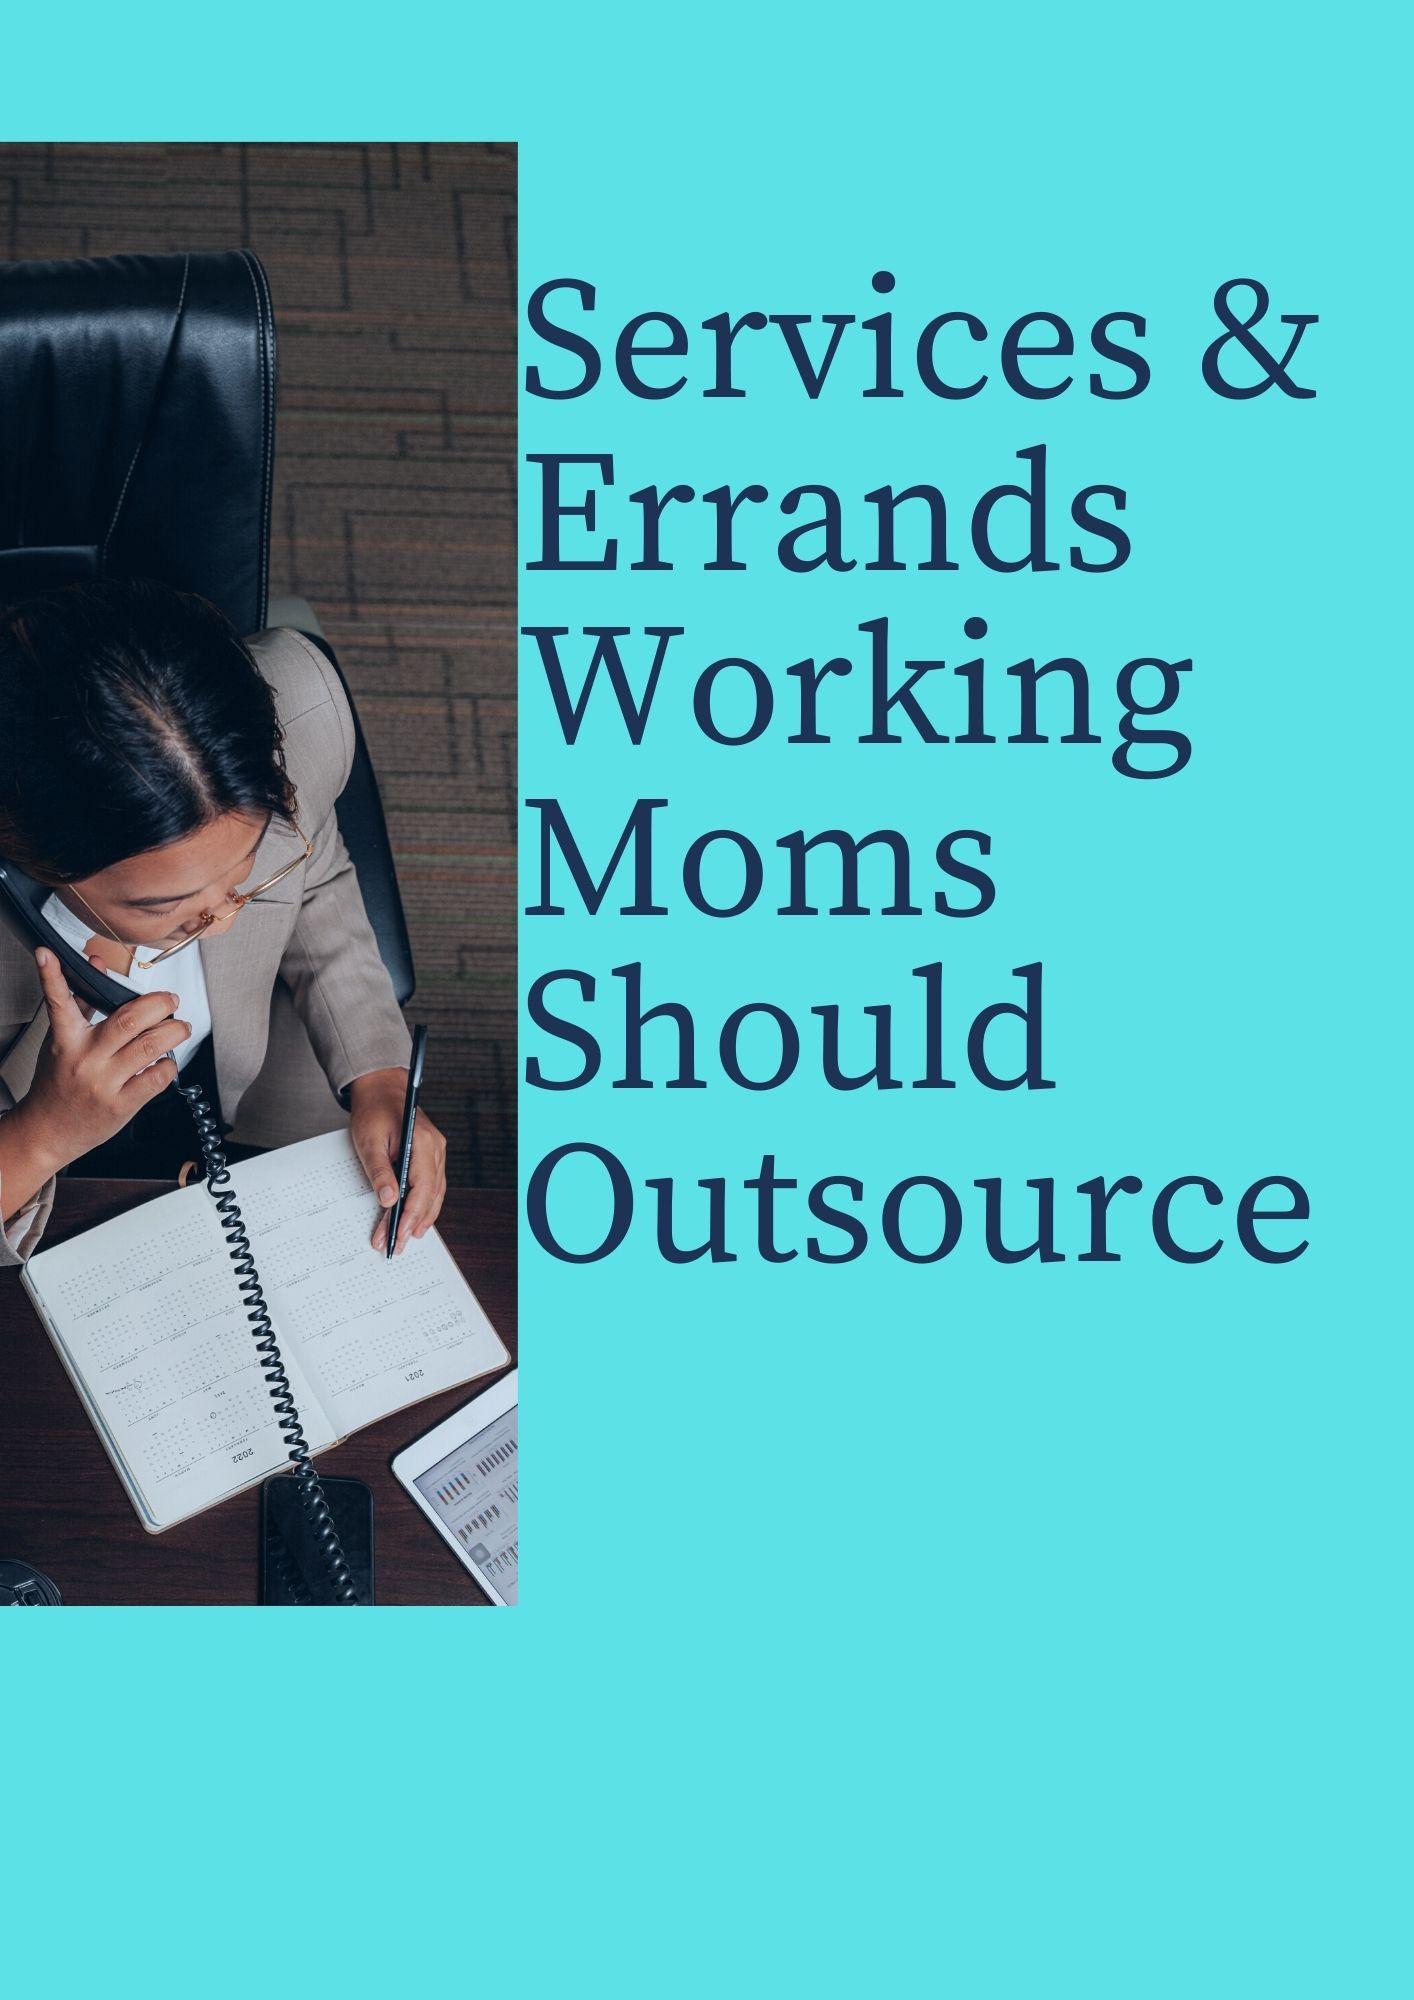 Revealed: 7 Services Moms Must Outsource to Save Time